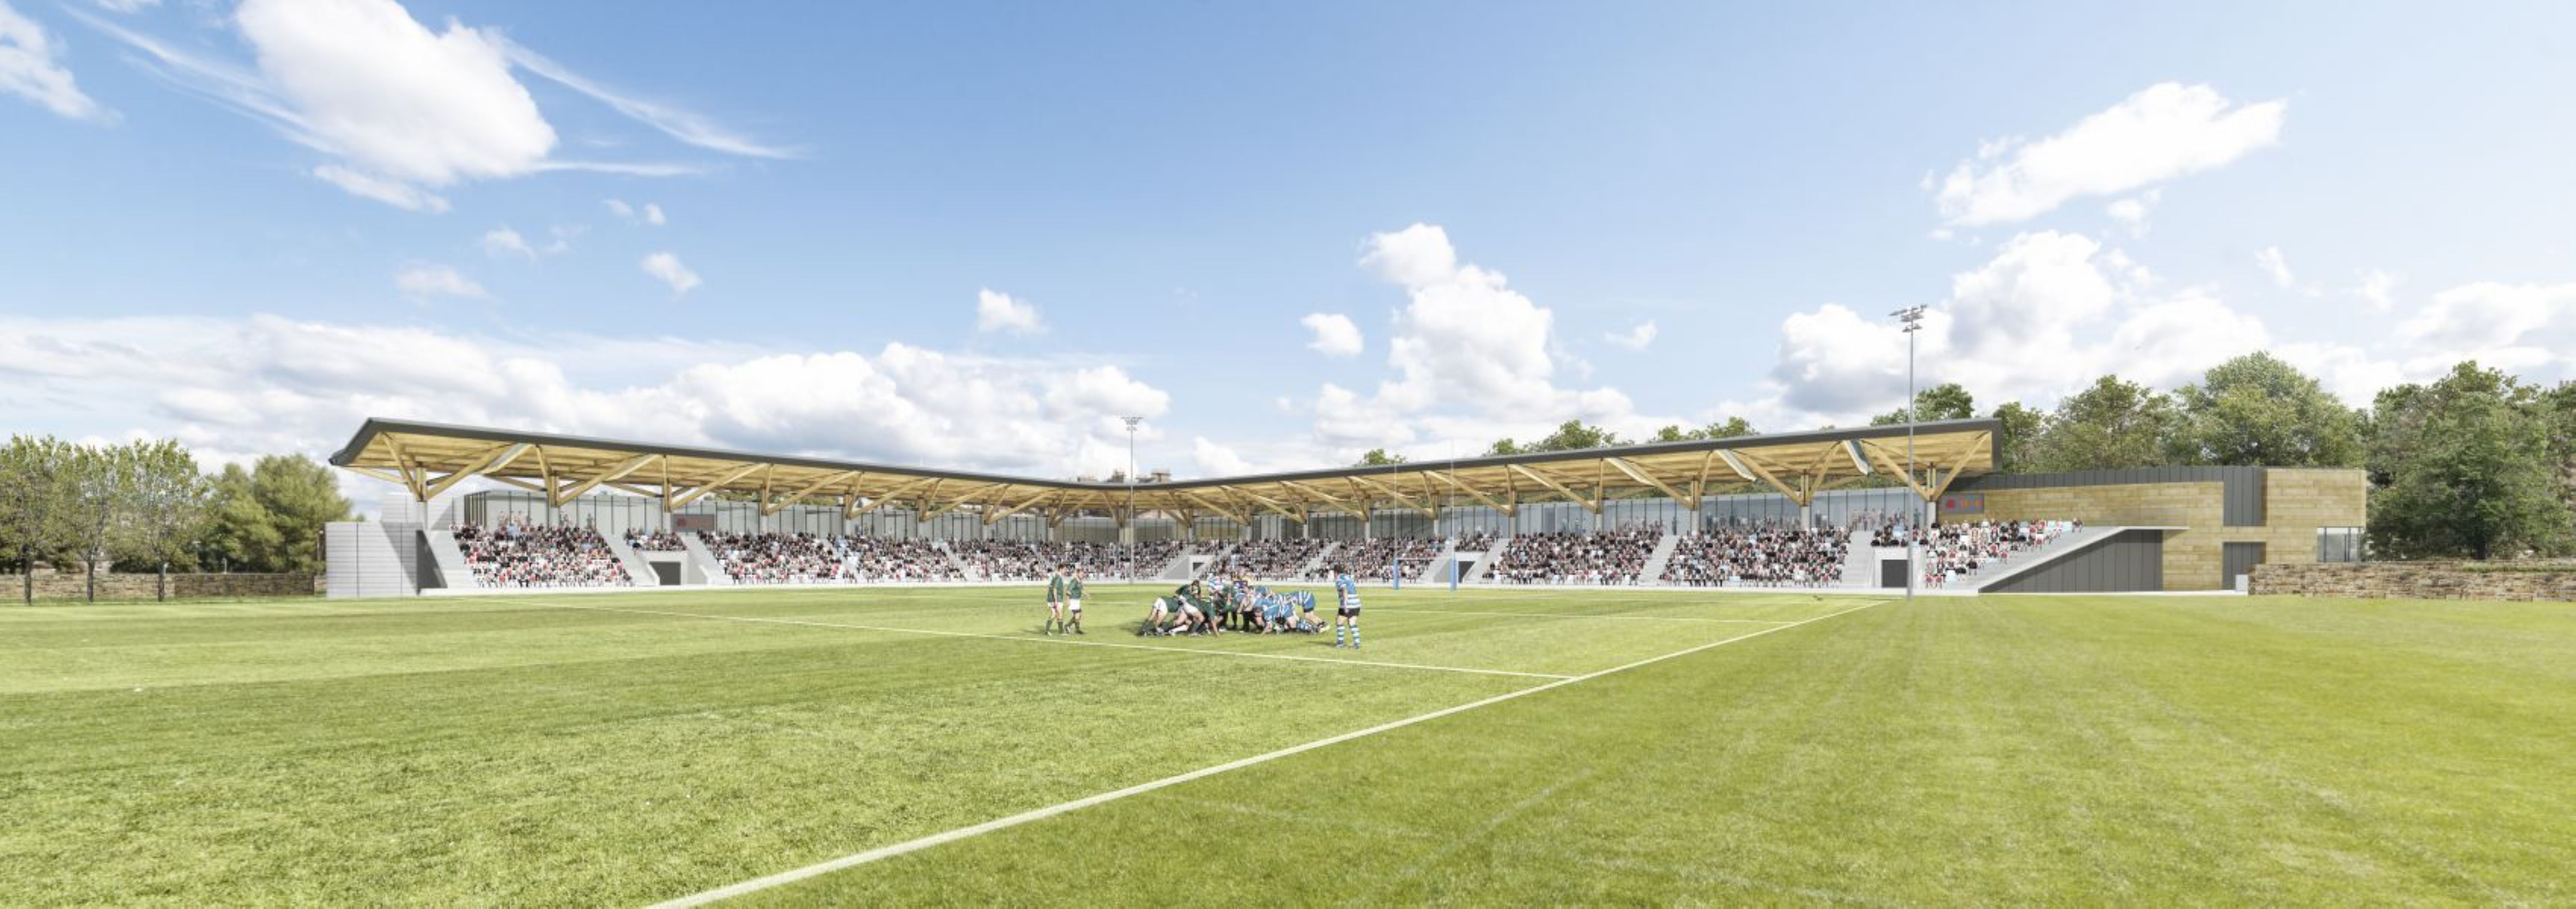 Stage for world’s first international rugby match set for revamp